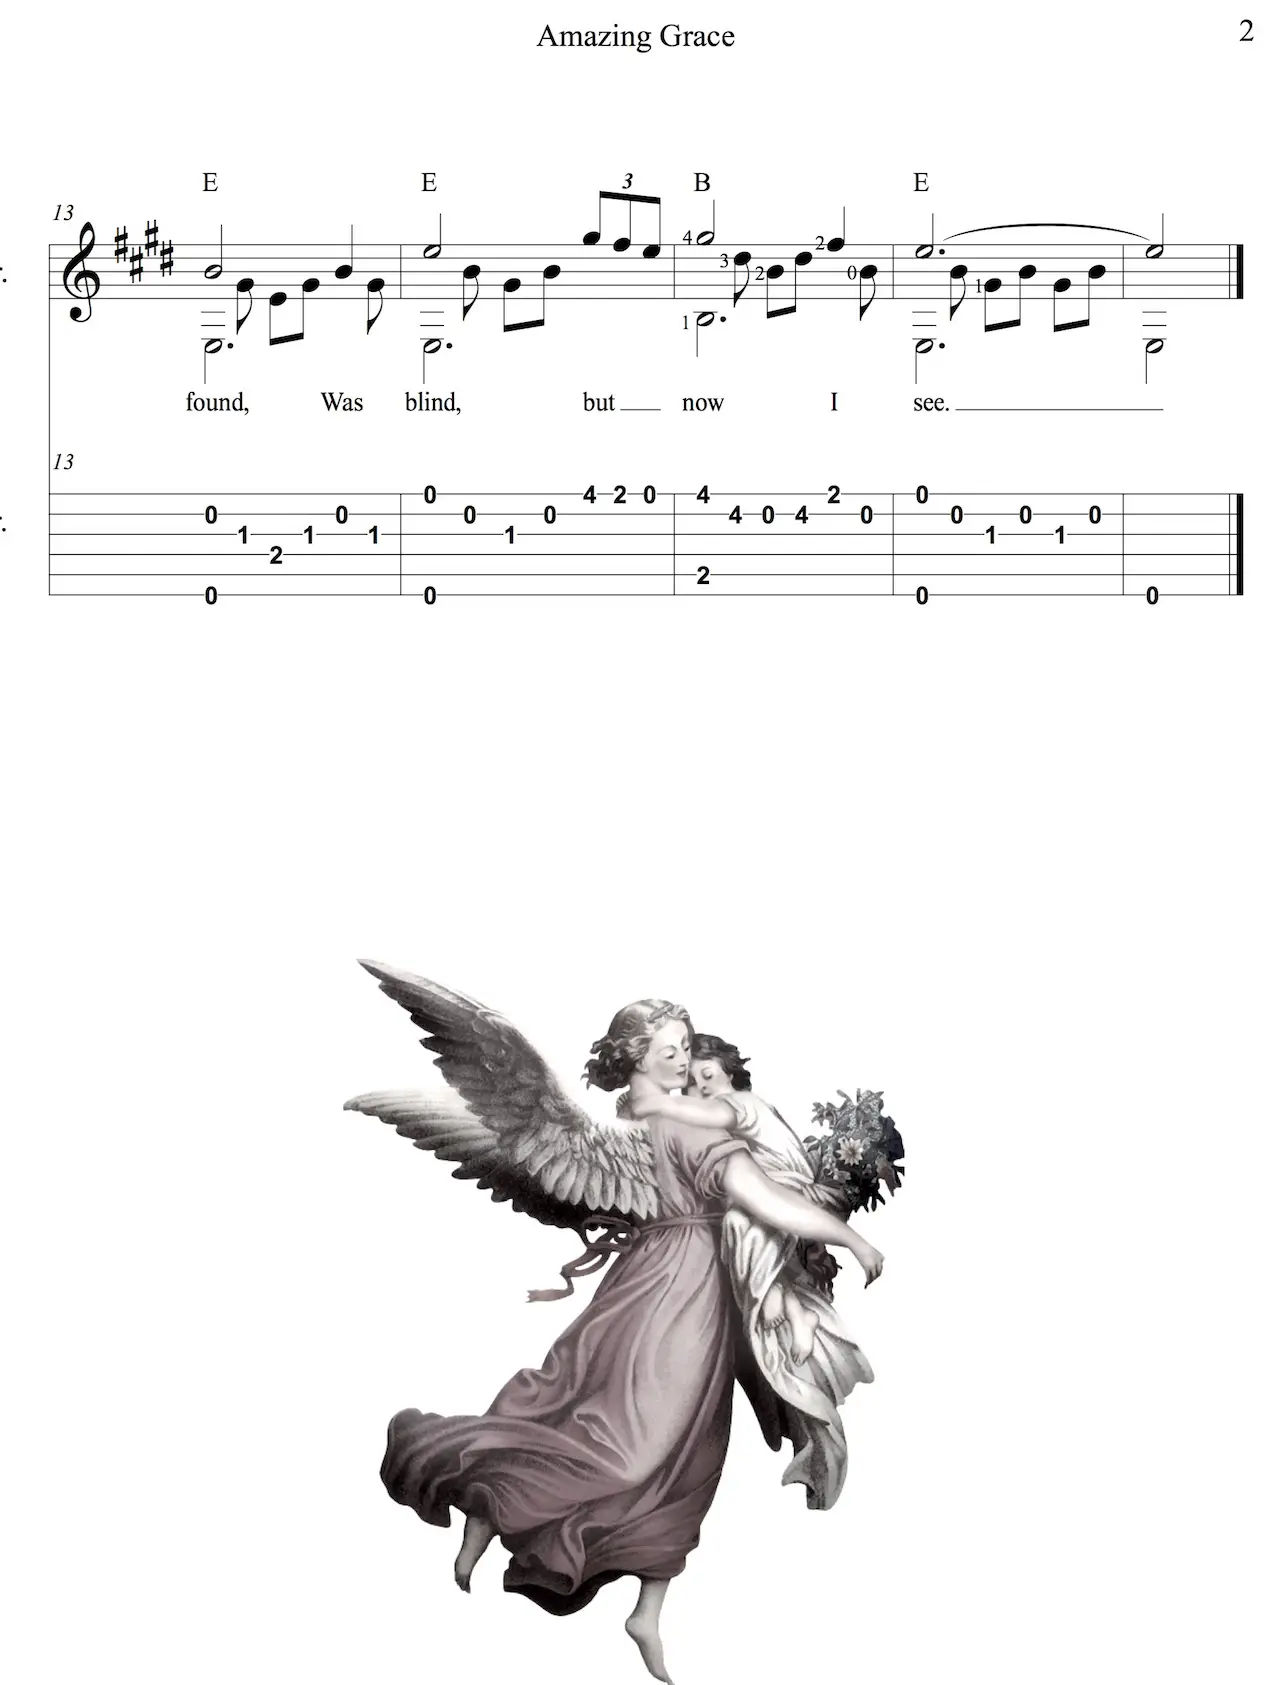 Amazing Grace Easy Guitar Sheet Music with Notes and Tablature in E - page 2.